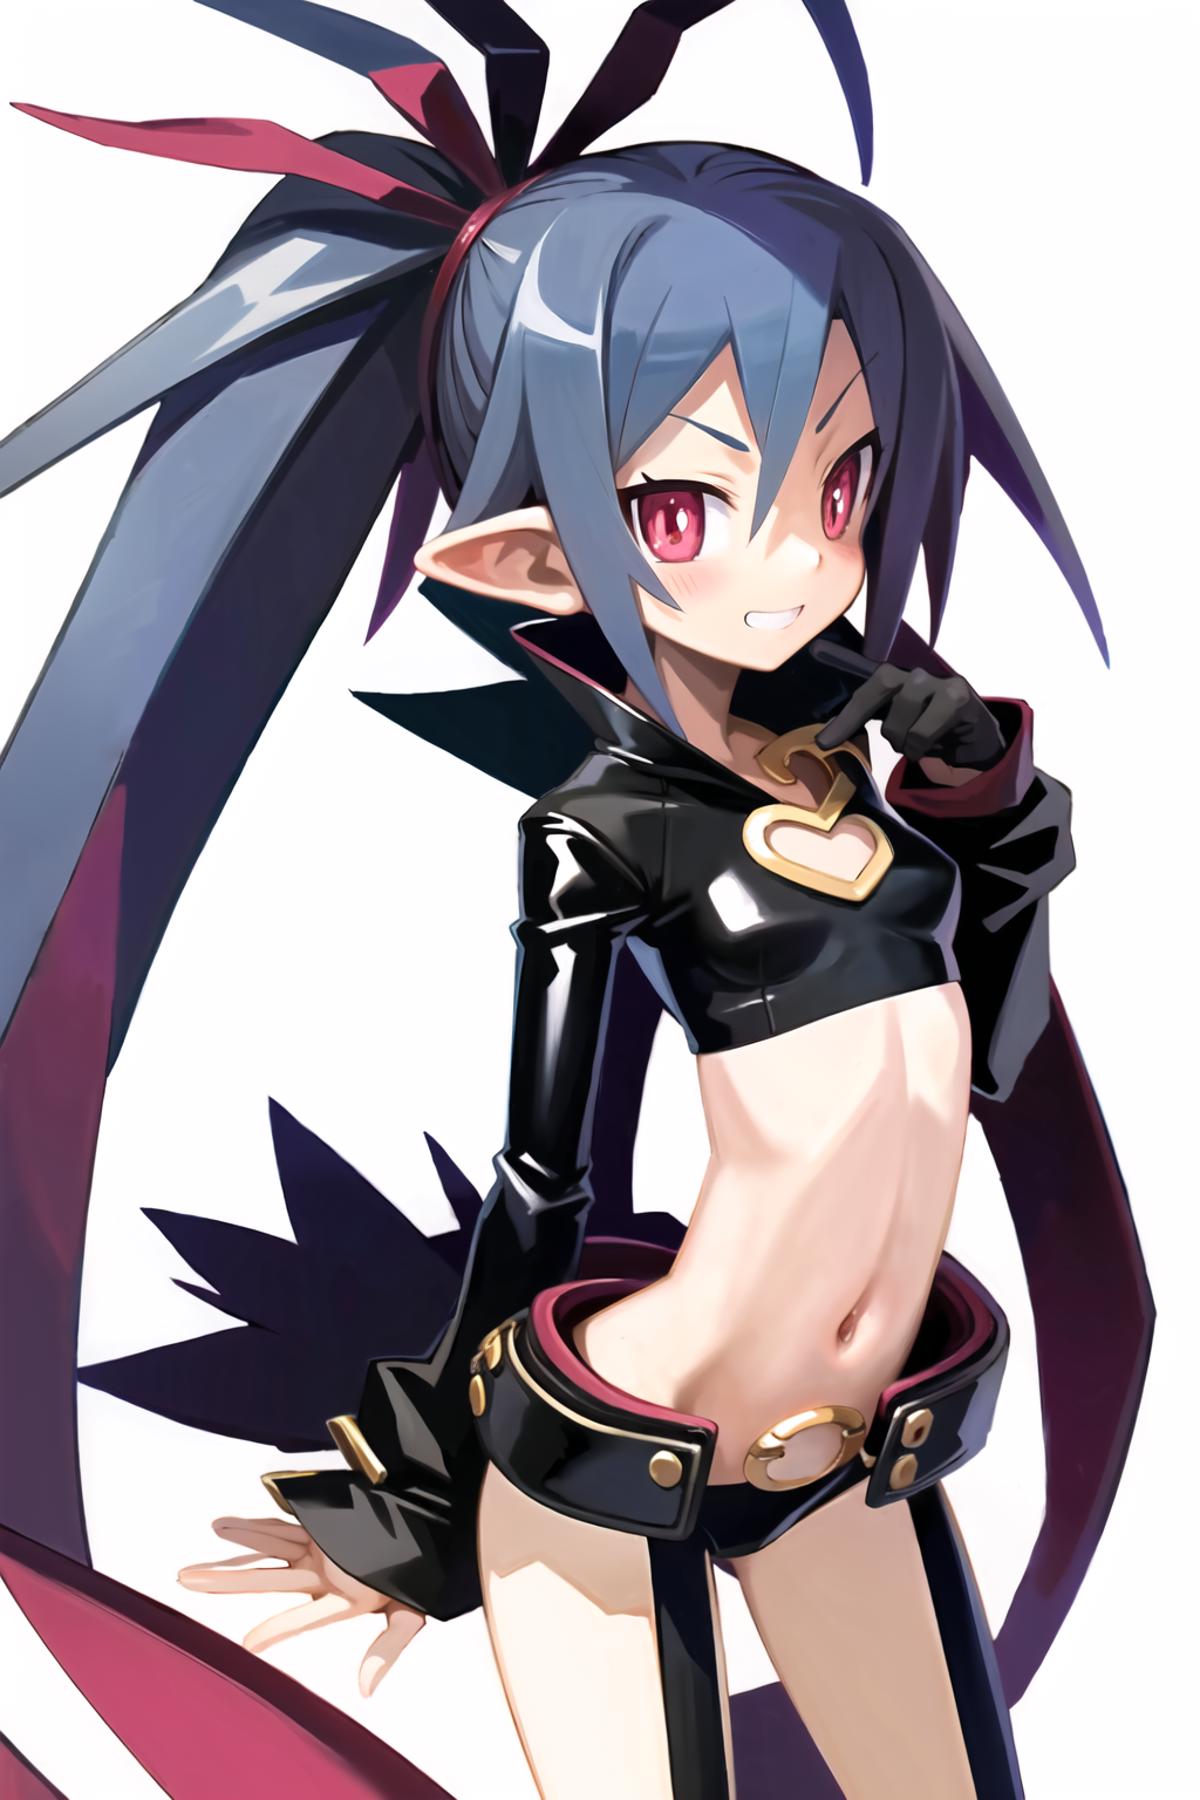 Disgaea Style / 魔界戦記ディスガイア image by bittercat